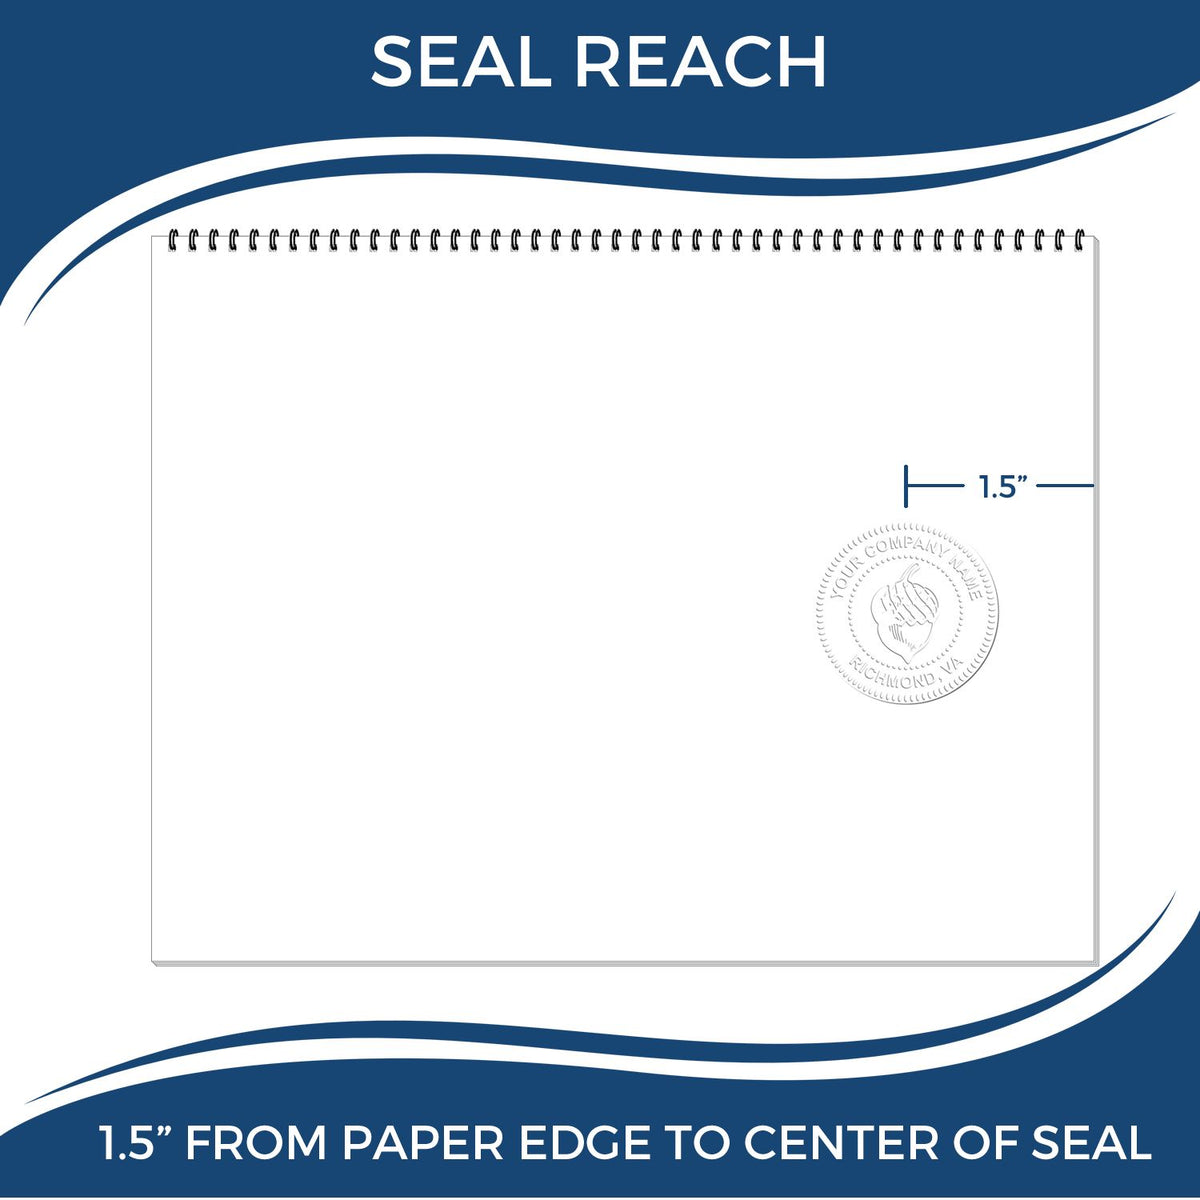 An infographic showing the seal reach which is represented by a ruler and a miniature seal image of the Hybrid Hawaii Landscape Architect Seal